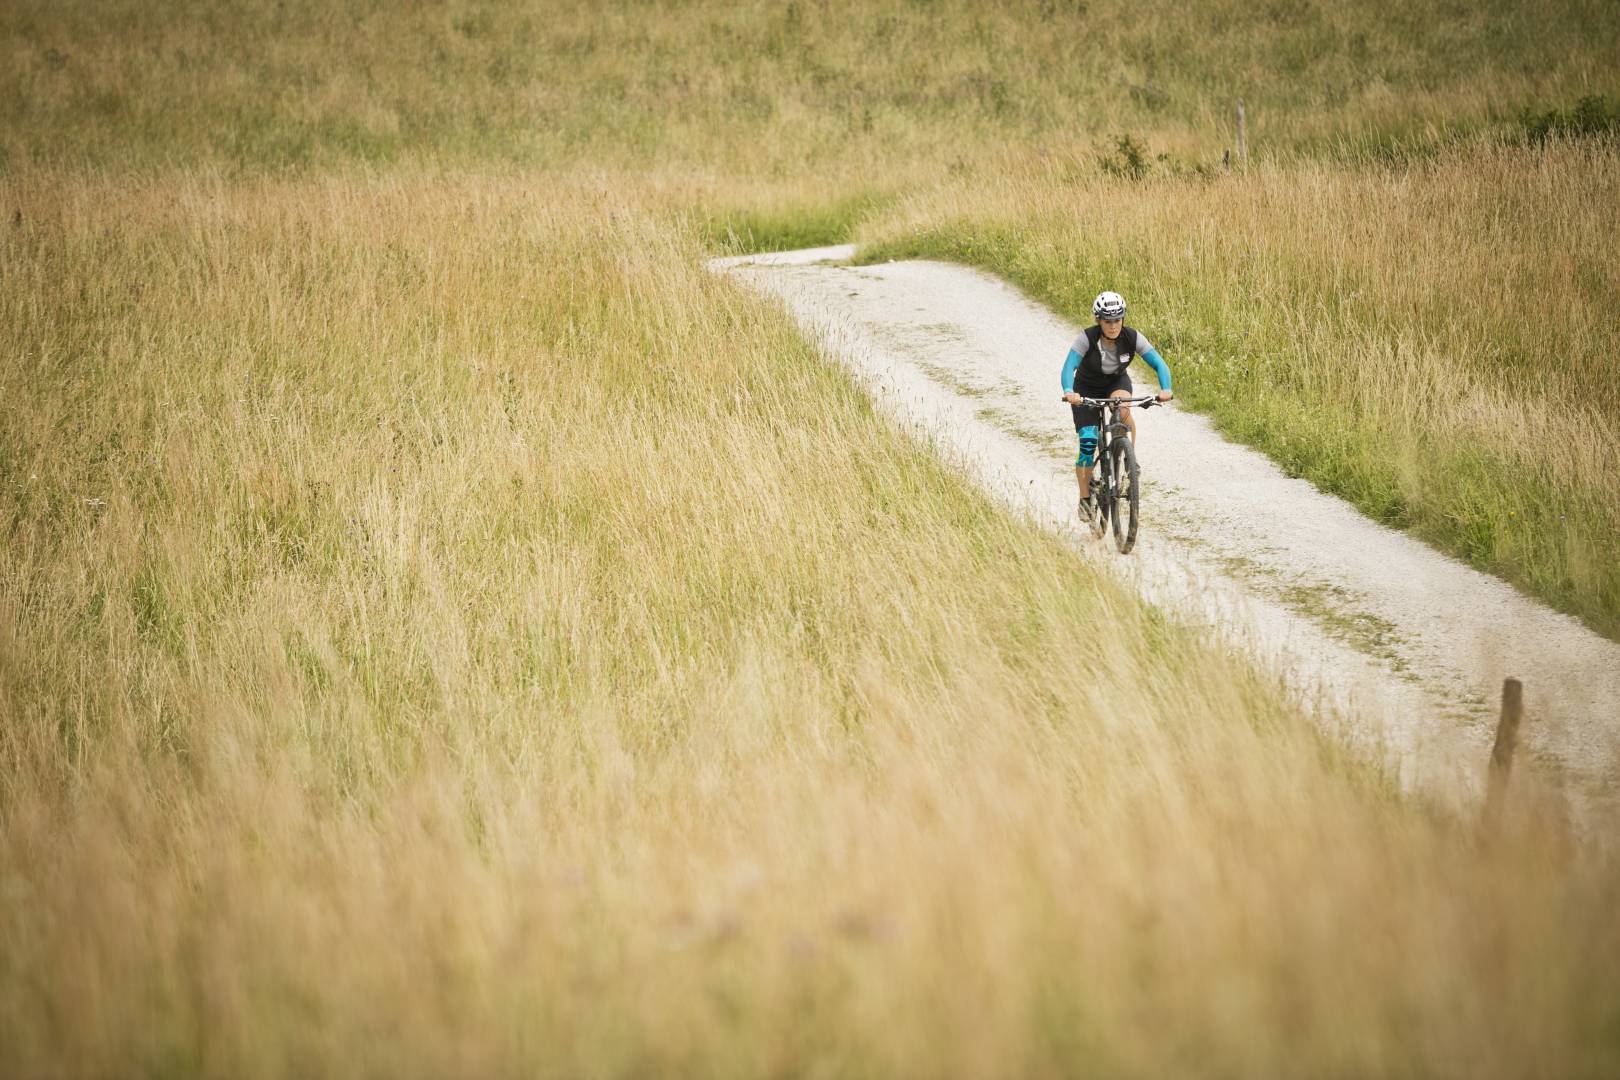 Woman with Armsleeves and knee band in the background of the image runs on a mountain bike over a path between high grass